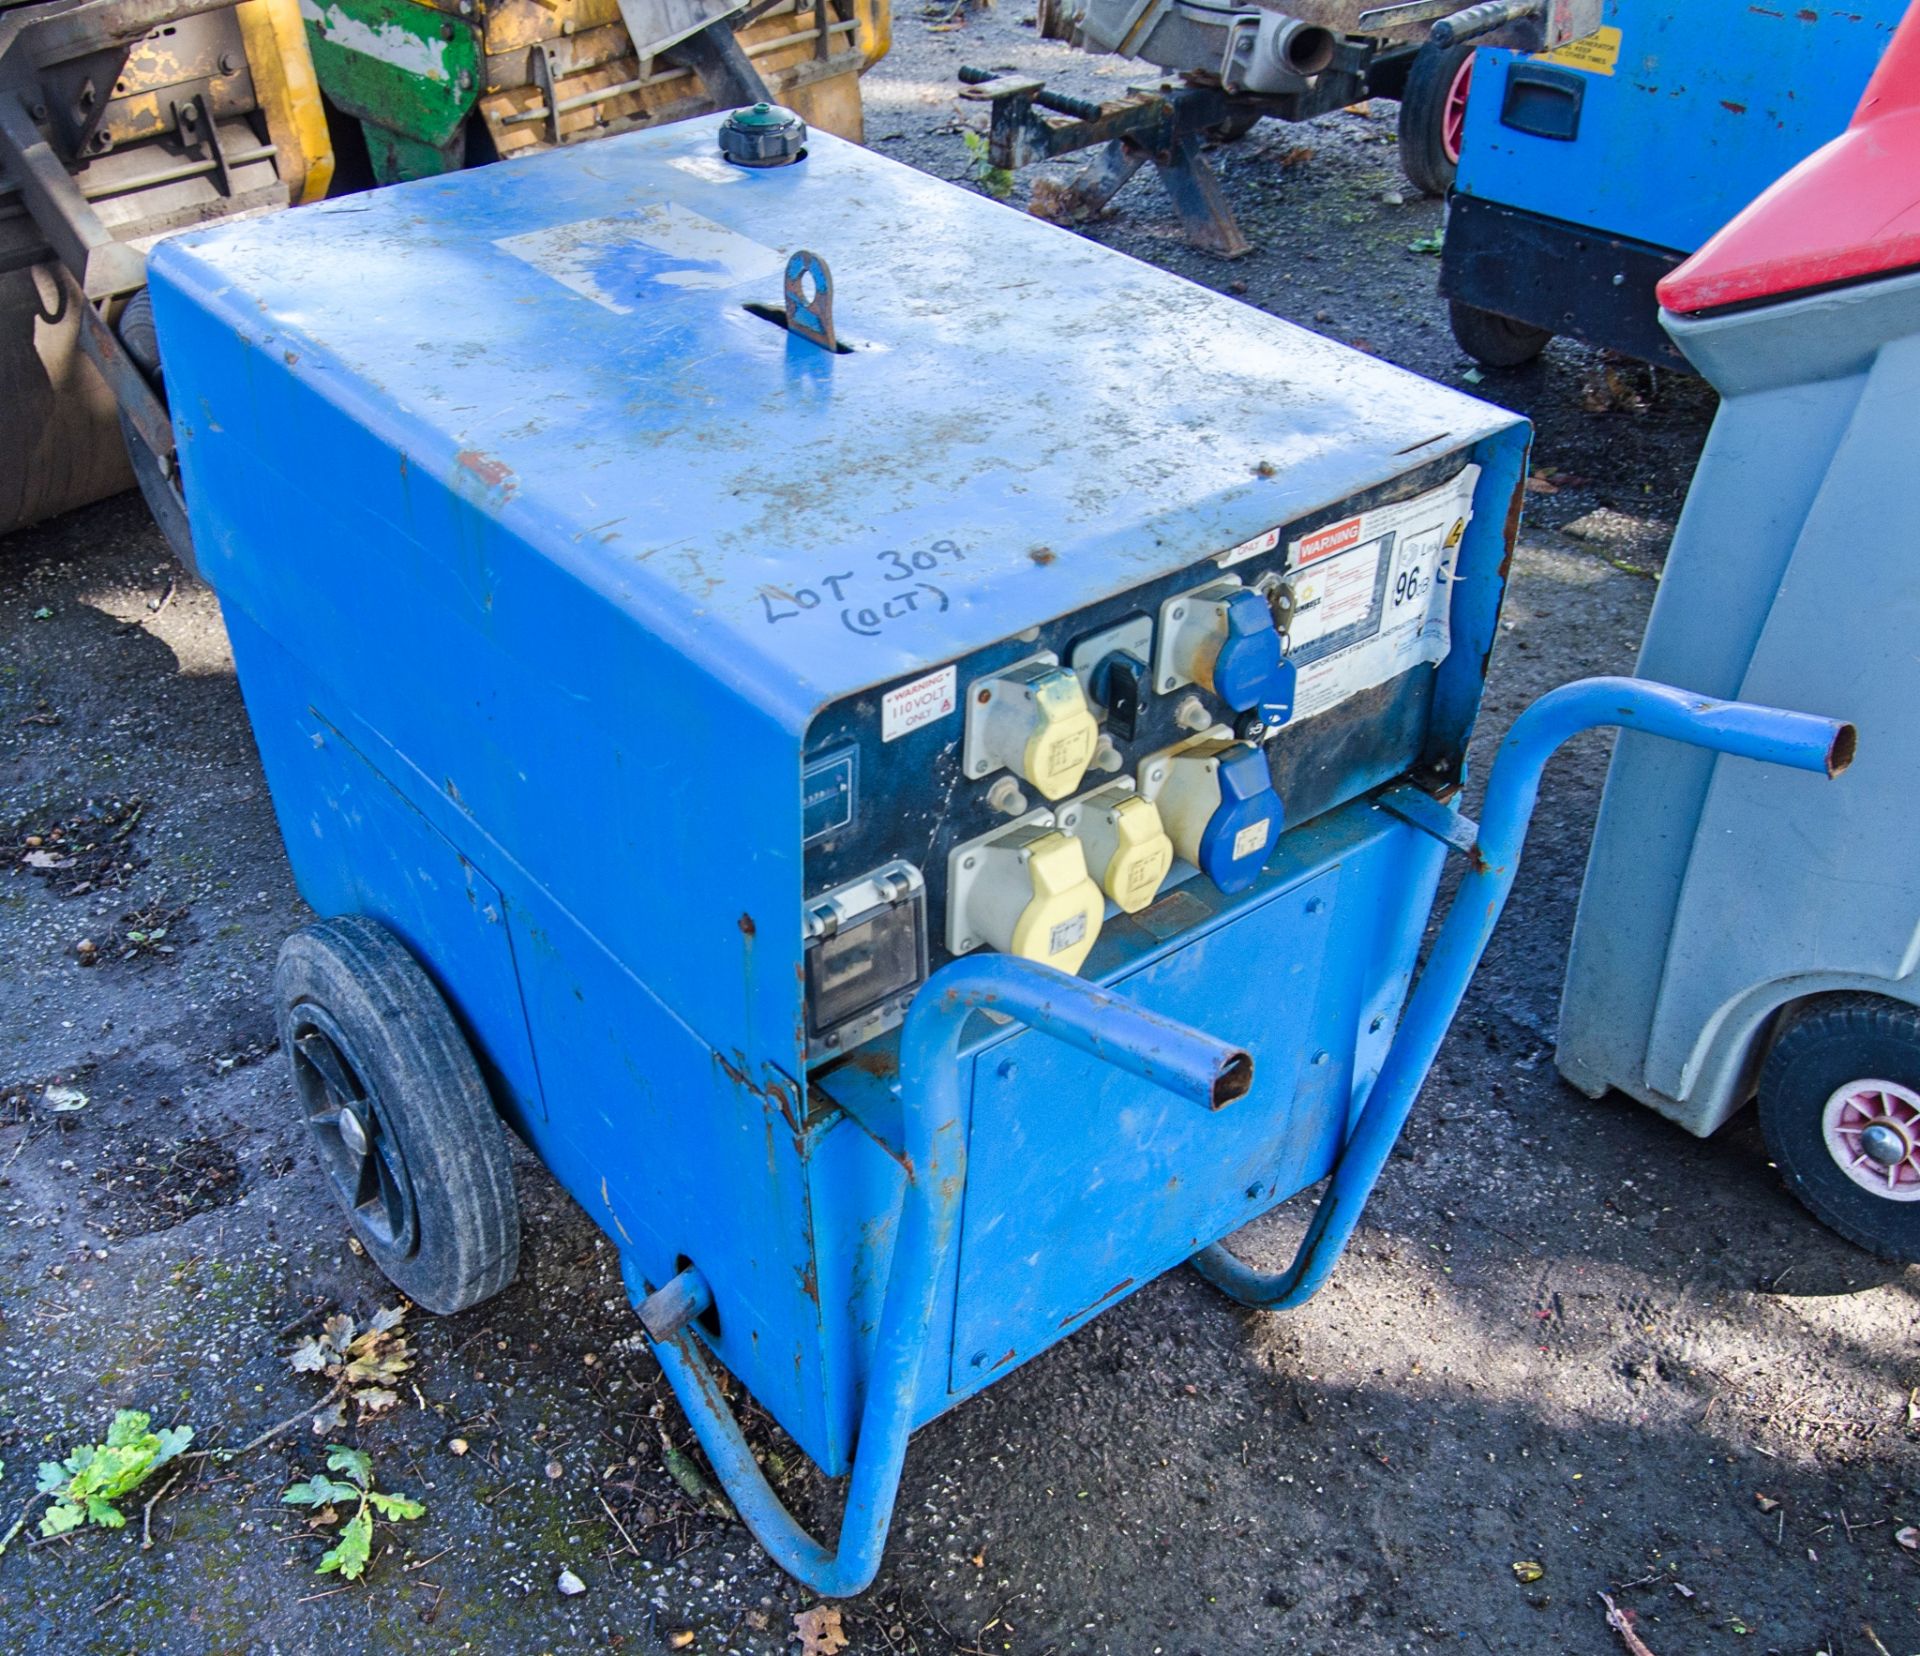 Stephill 6 kva diesel driven generator 279784 Recorded hours: 1379 A854251